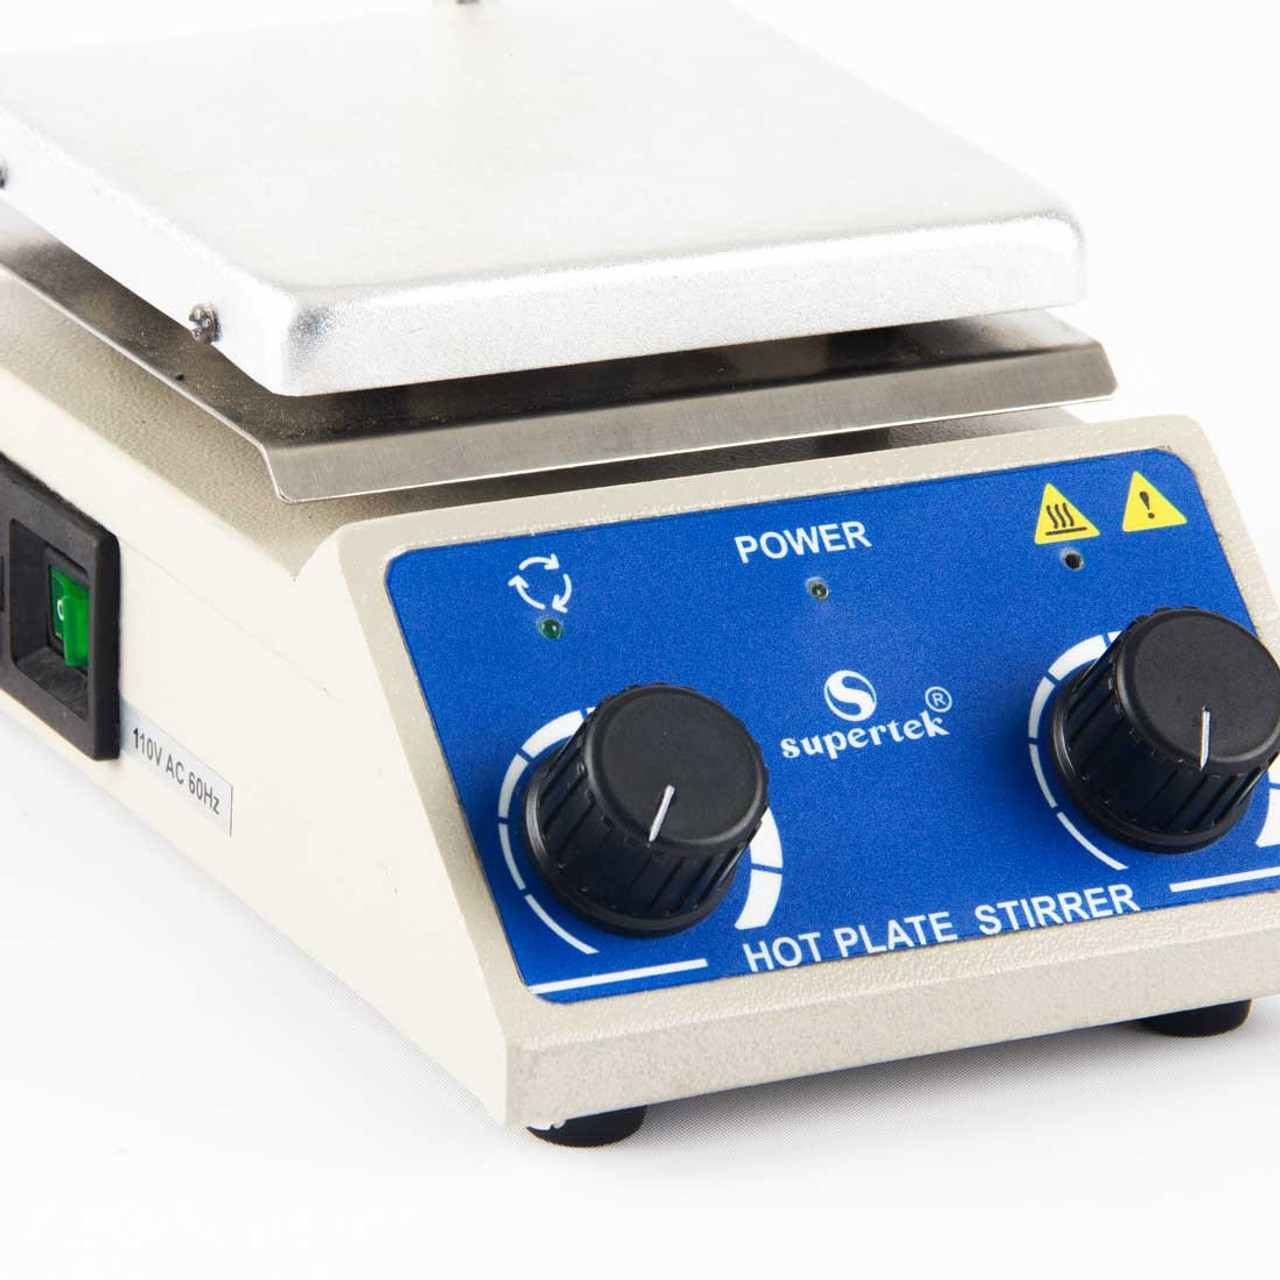 Flinn Scientific Hot Plate with Magnetic Stirrers Chemistry